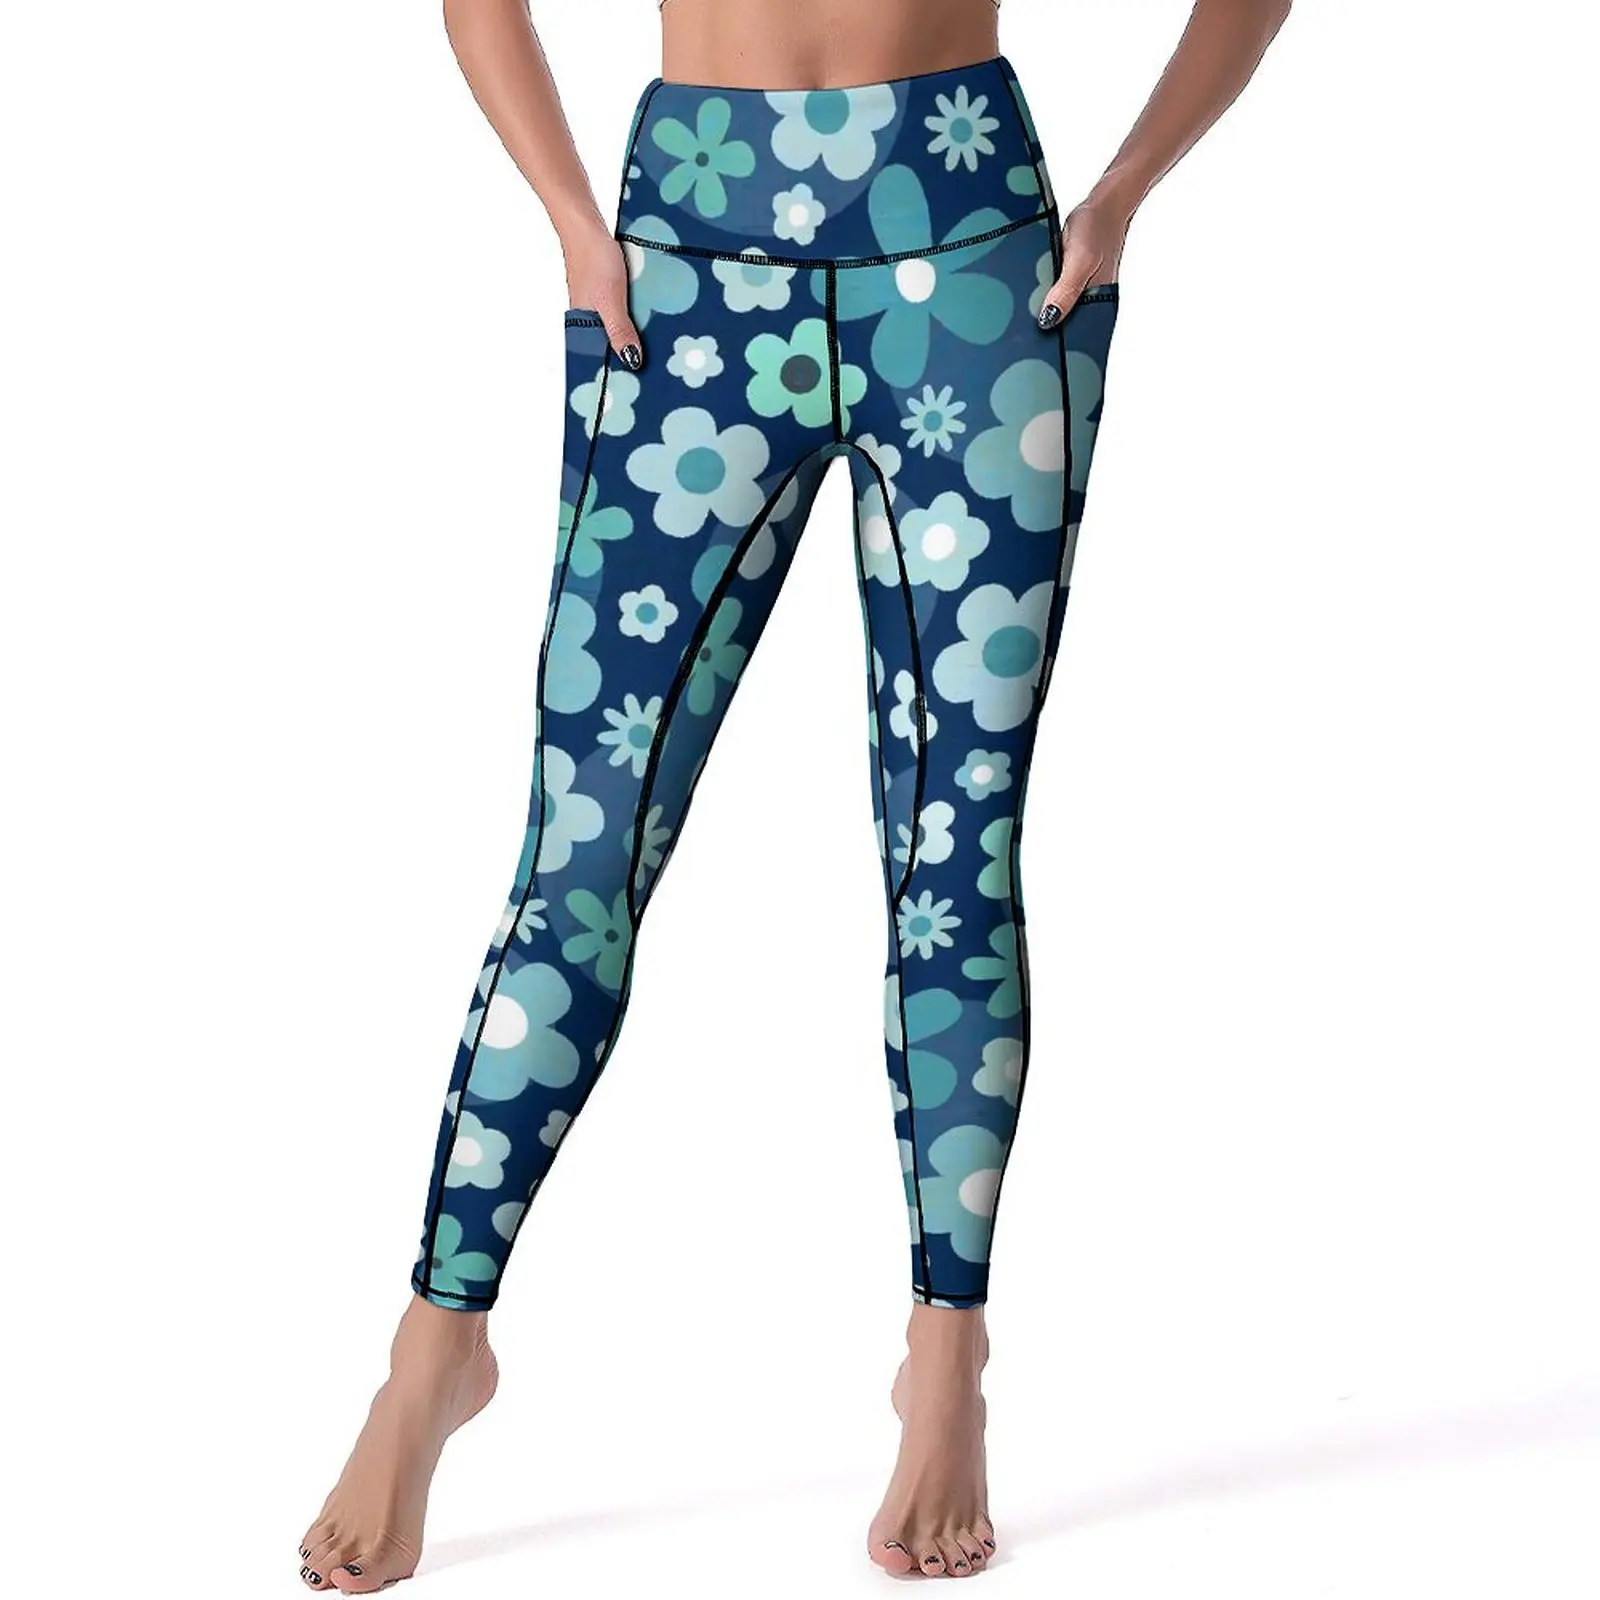 

Flower Power Leggings Sexy Ditsy Floral Gym Yoga Pants Push Up Stretch Sport Legging With Pockets Sweet Pattern Leggins